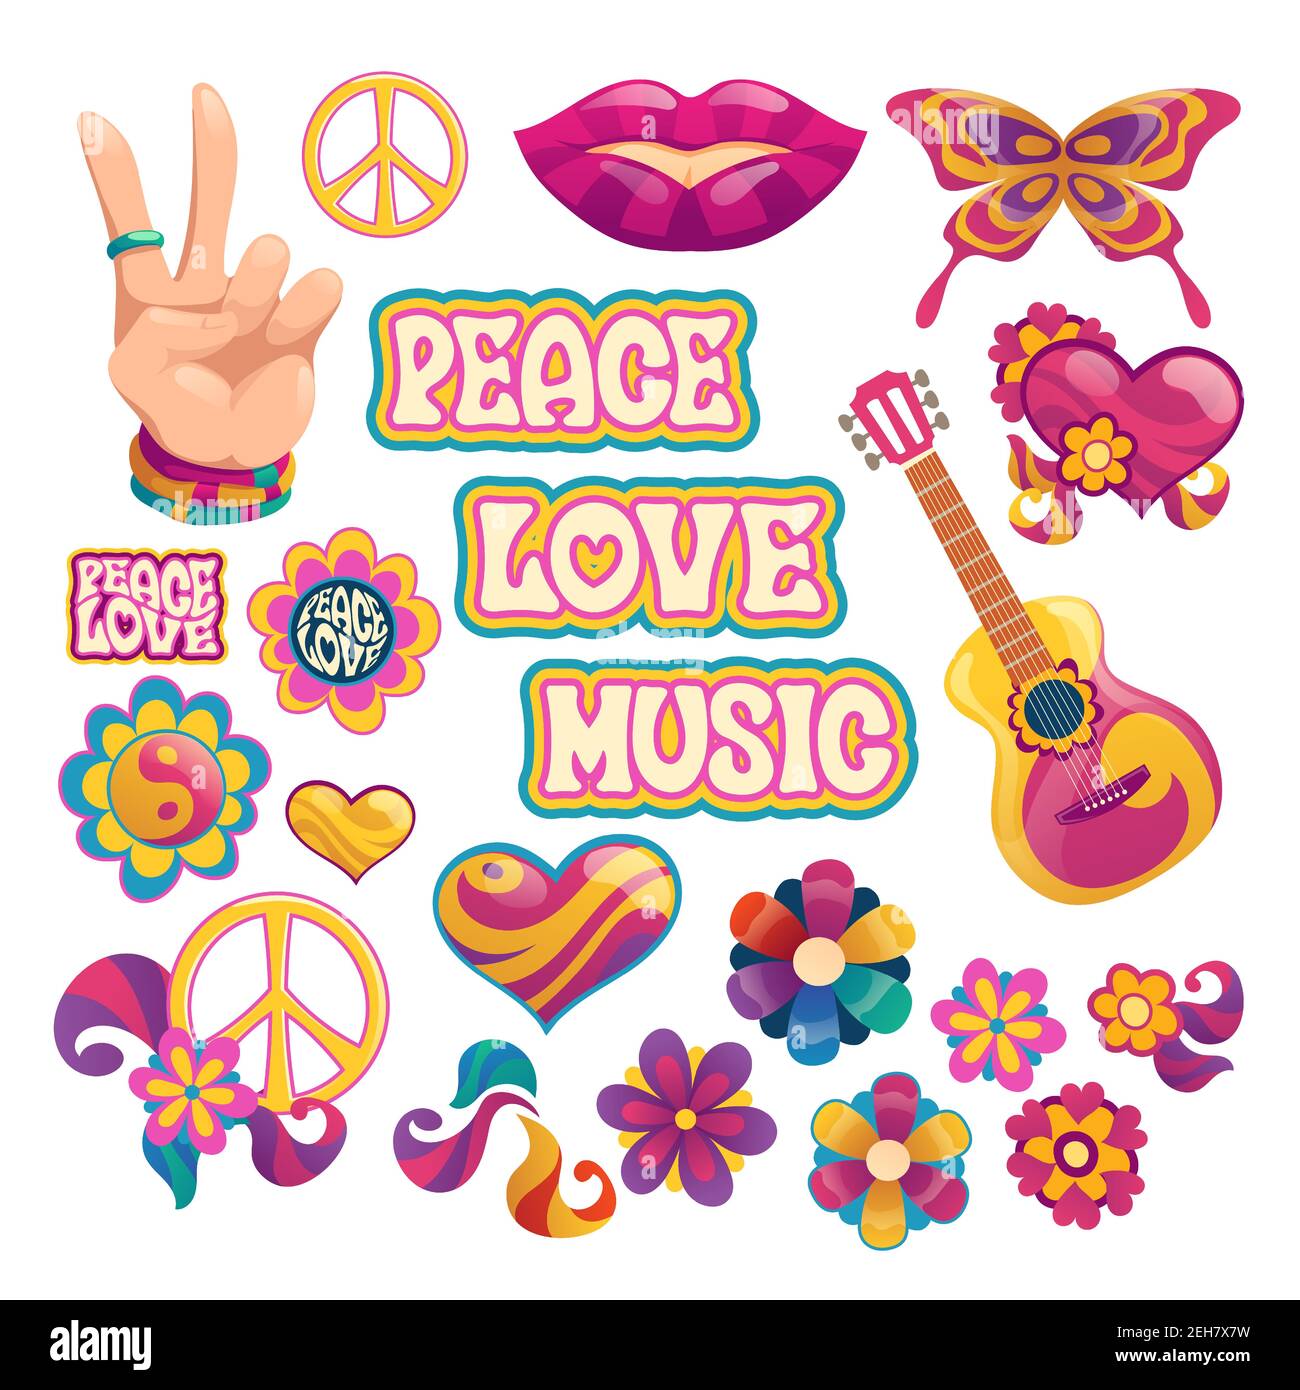 Hippie icons, signs of peace, love and music. Vector cartoon set symbols of hippy culture with hearts, flowers, guitar, hand gesture and smile lips isolated on white background Stock Vector